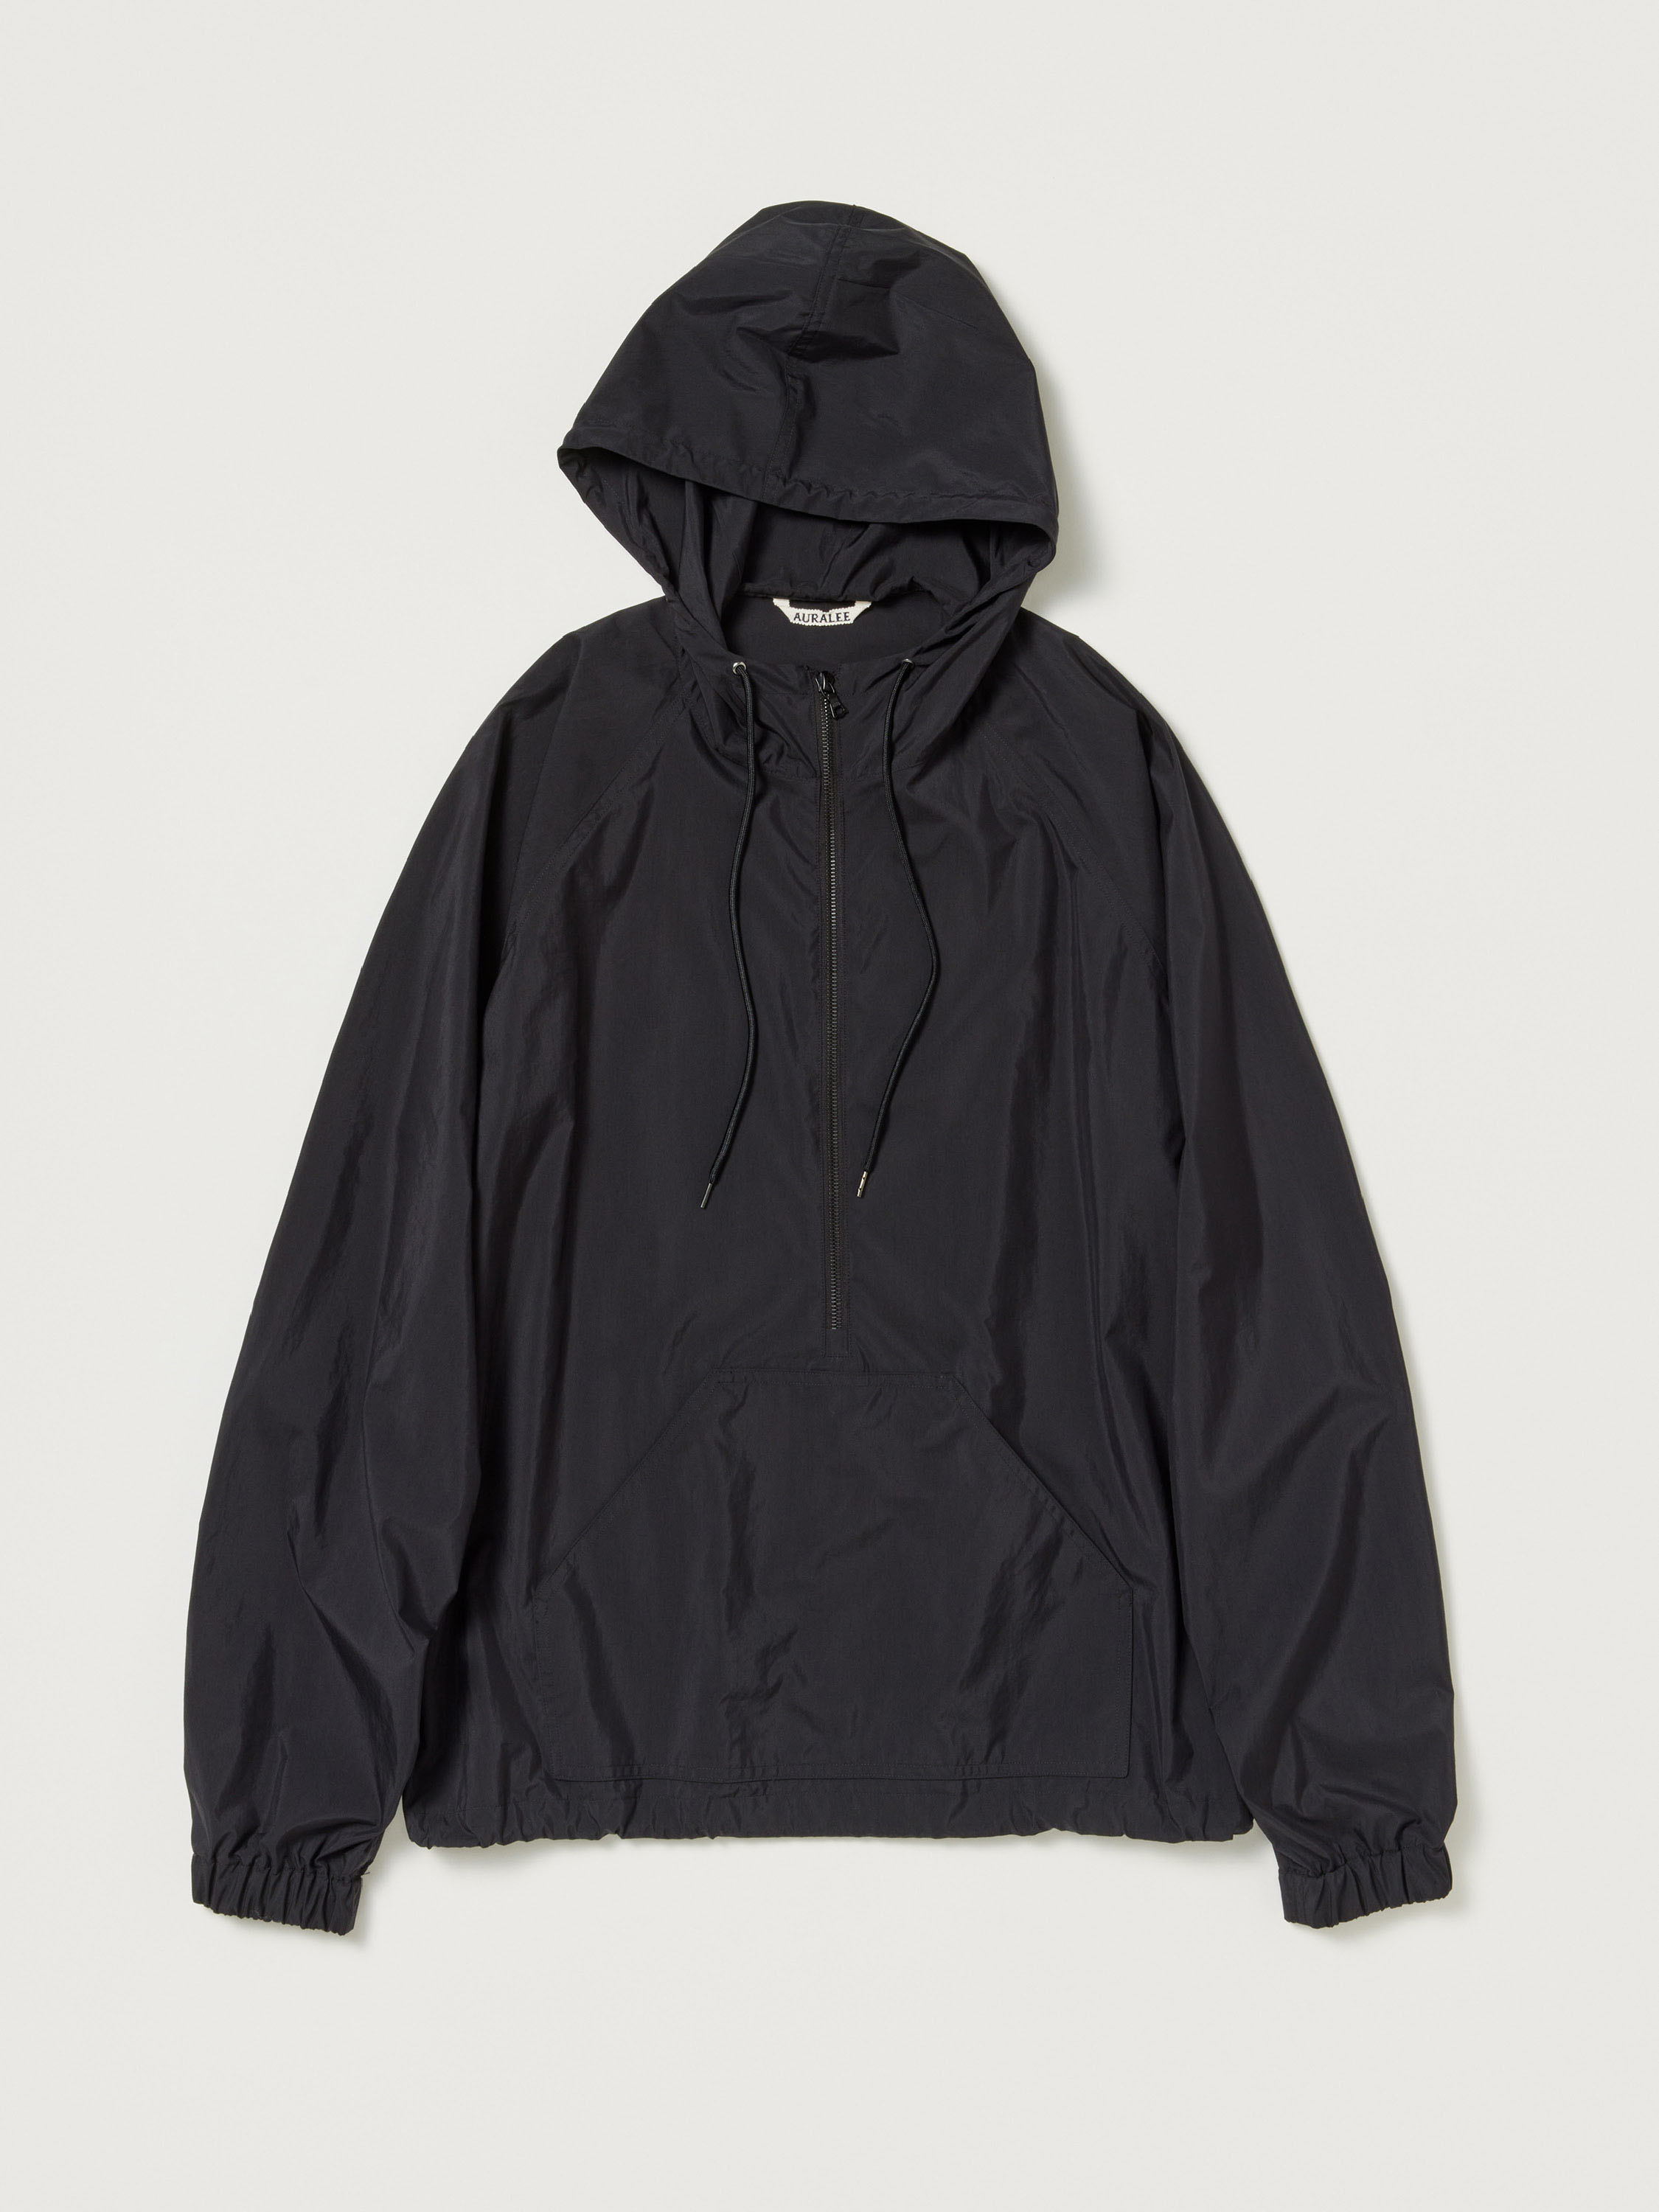 WASHED COTTON NYLON WEATHER HOODED ZIP P/O 詳細画像 BLACK 1